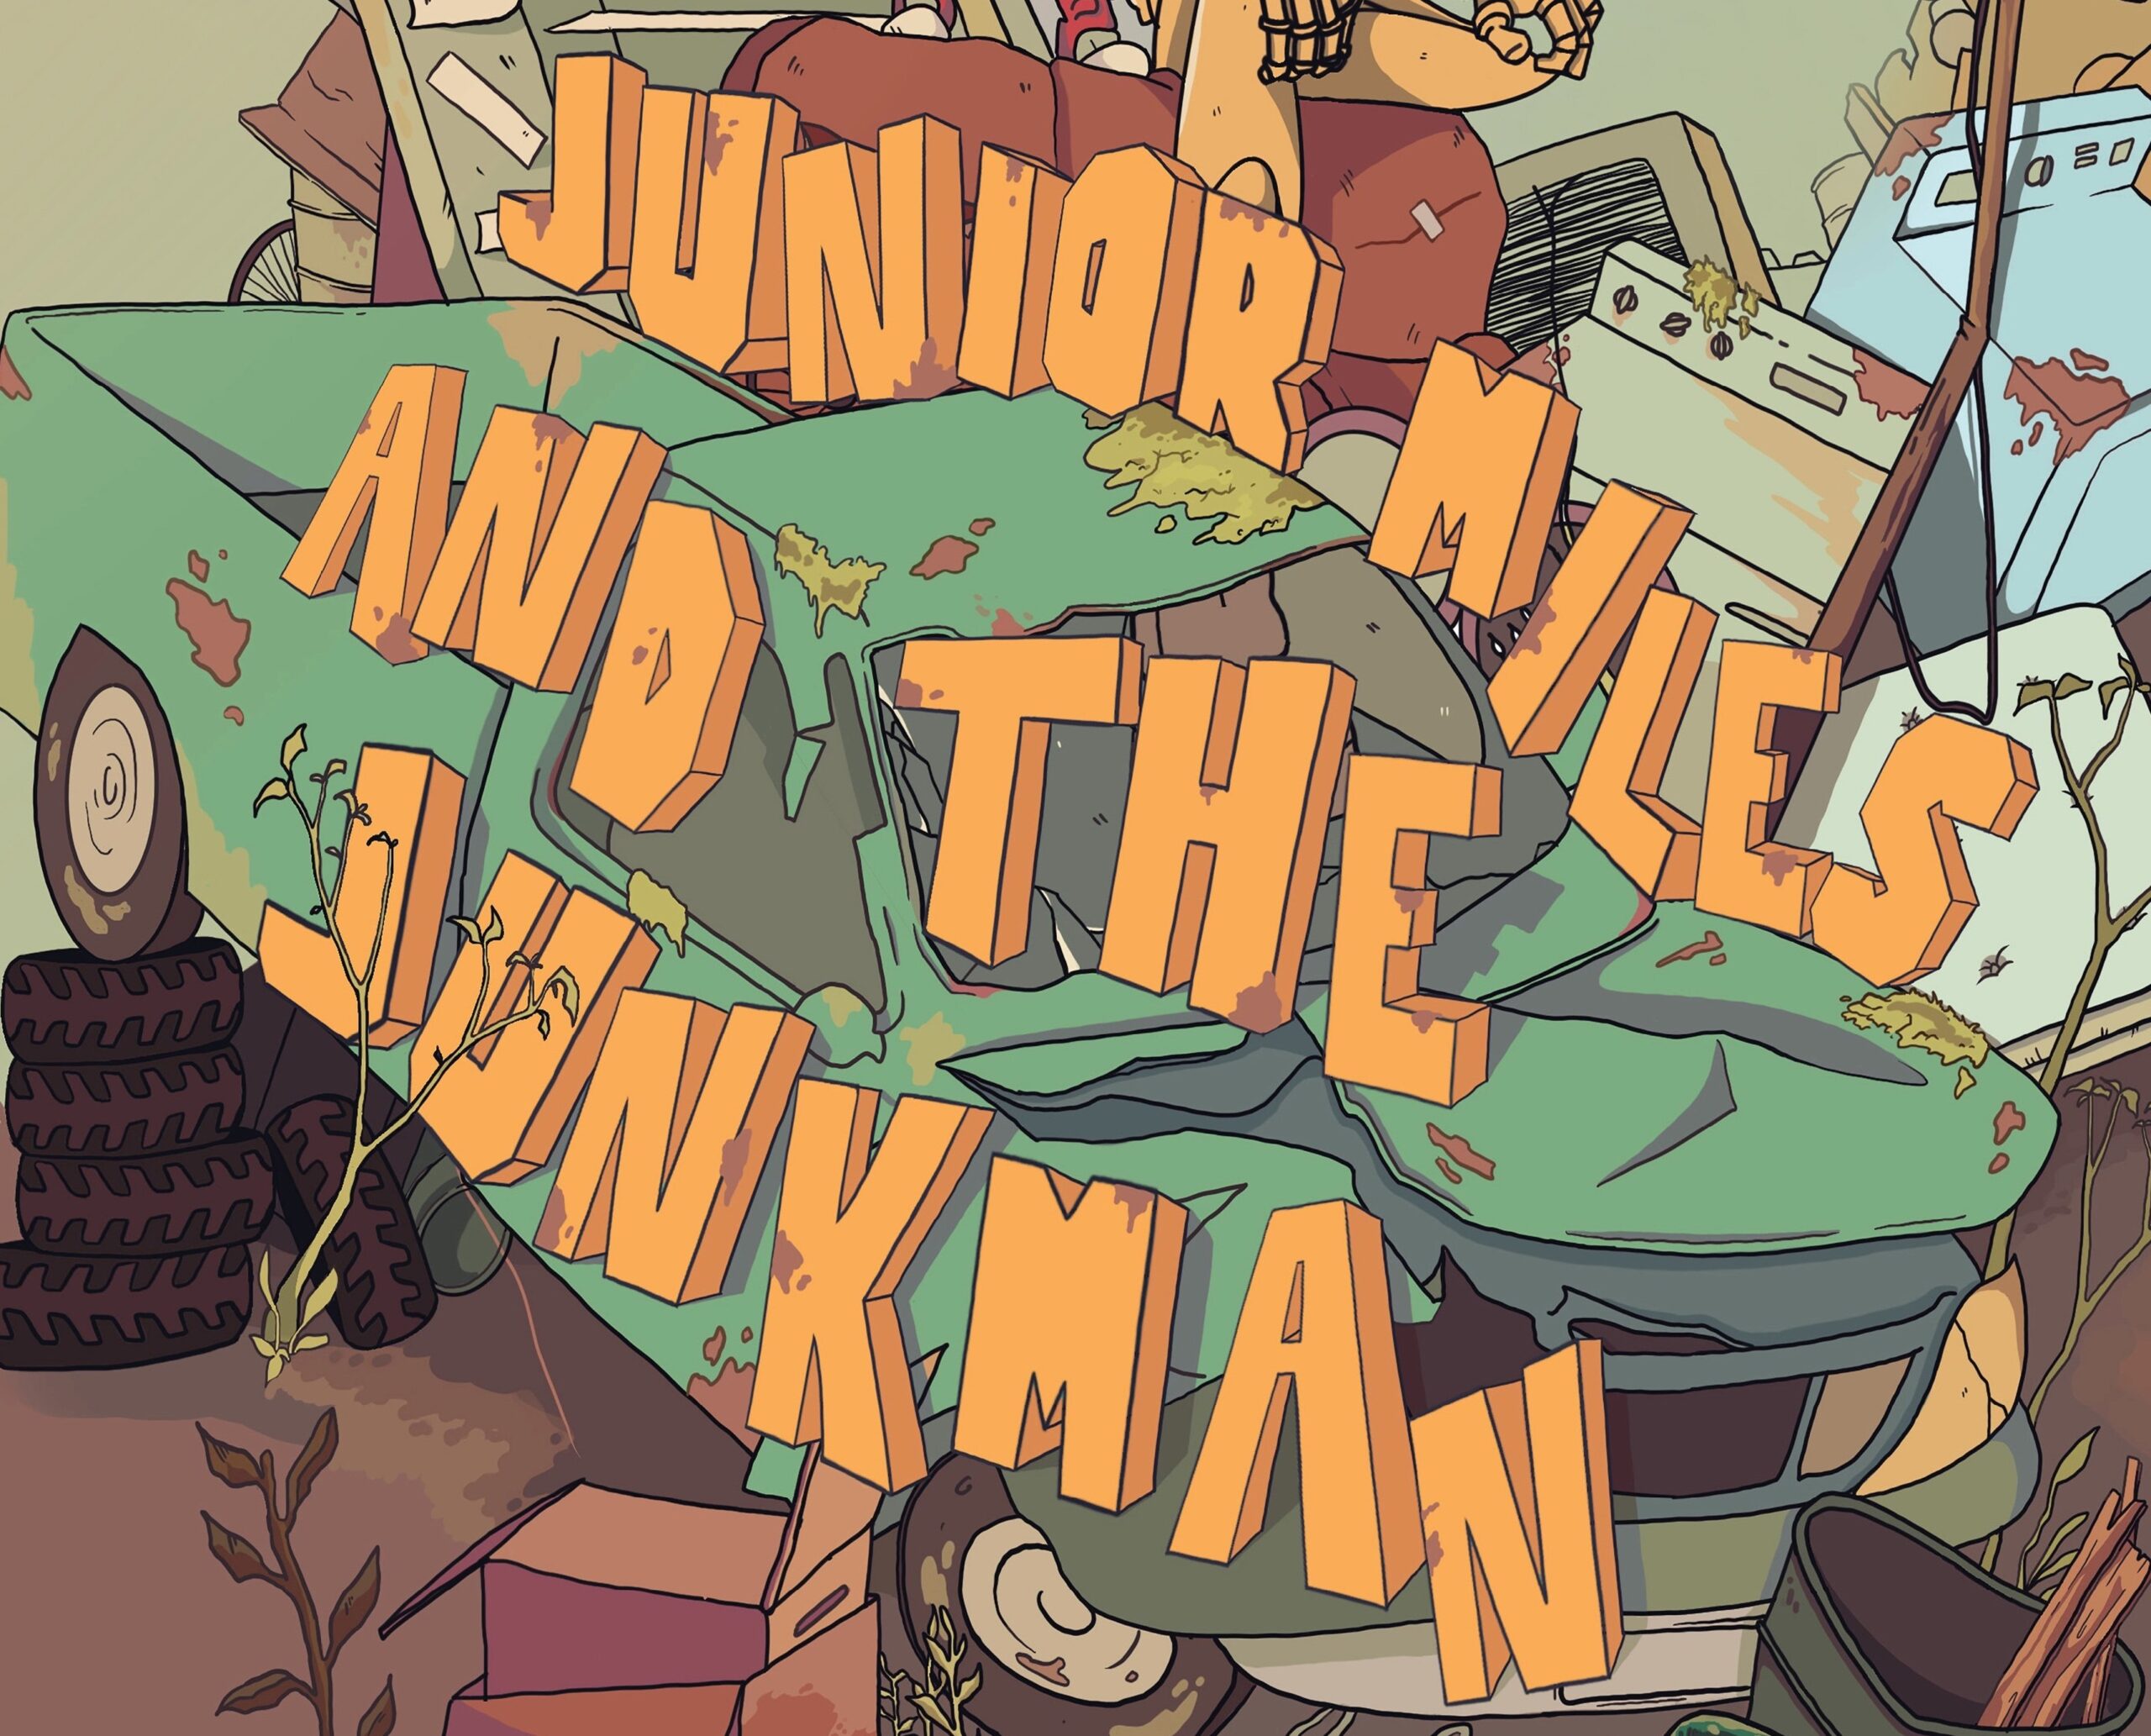 Junior miles and the junkman.